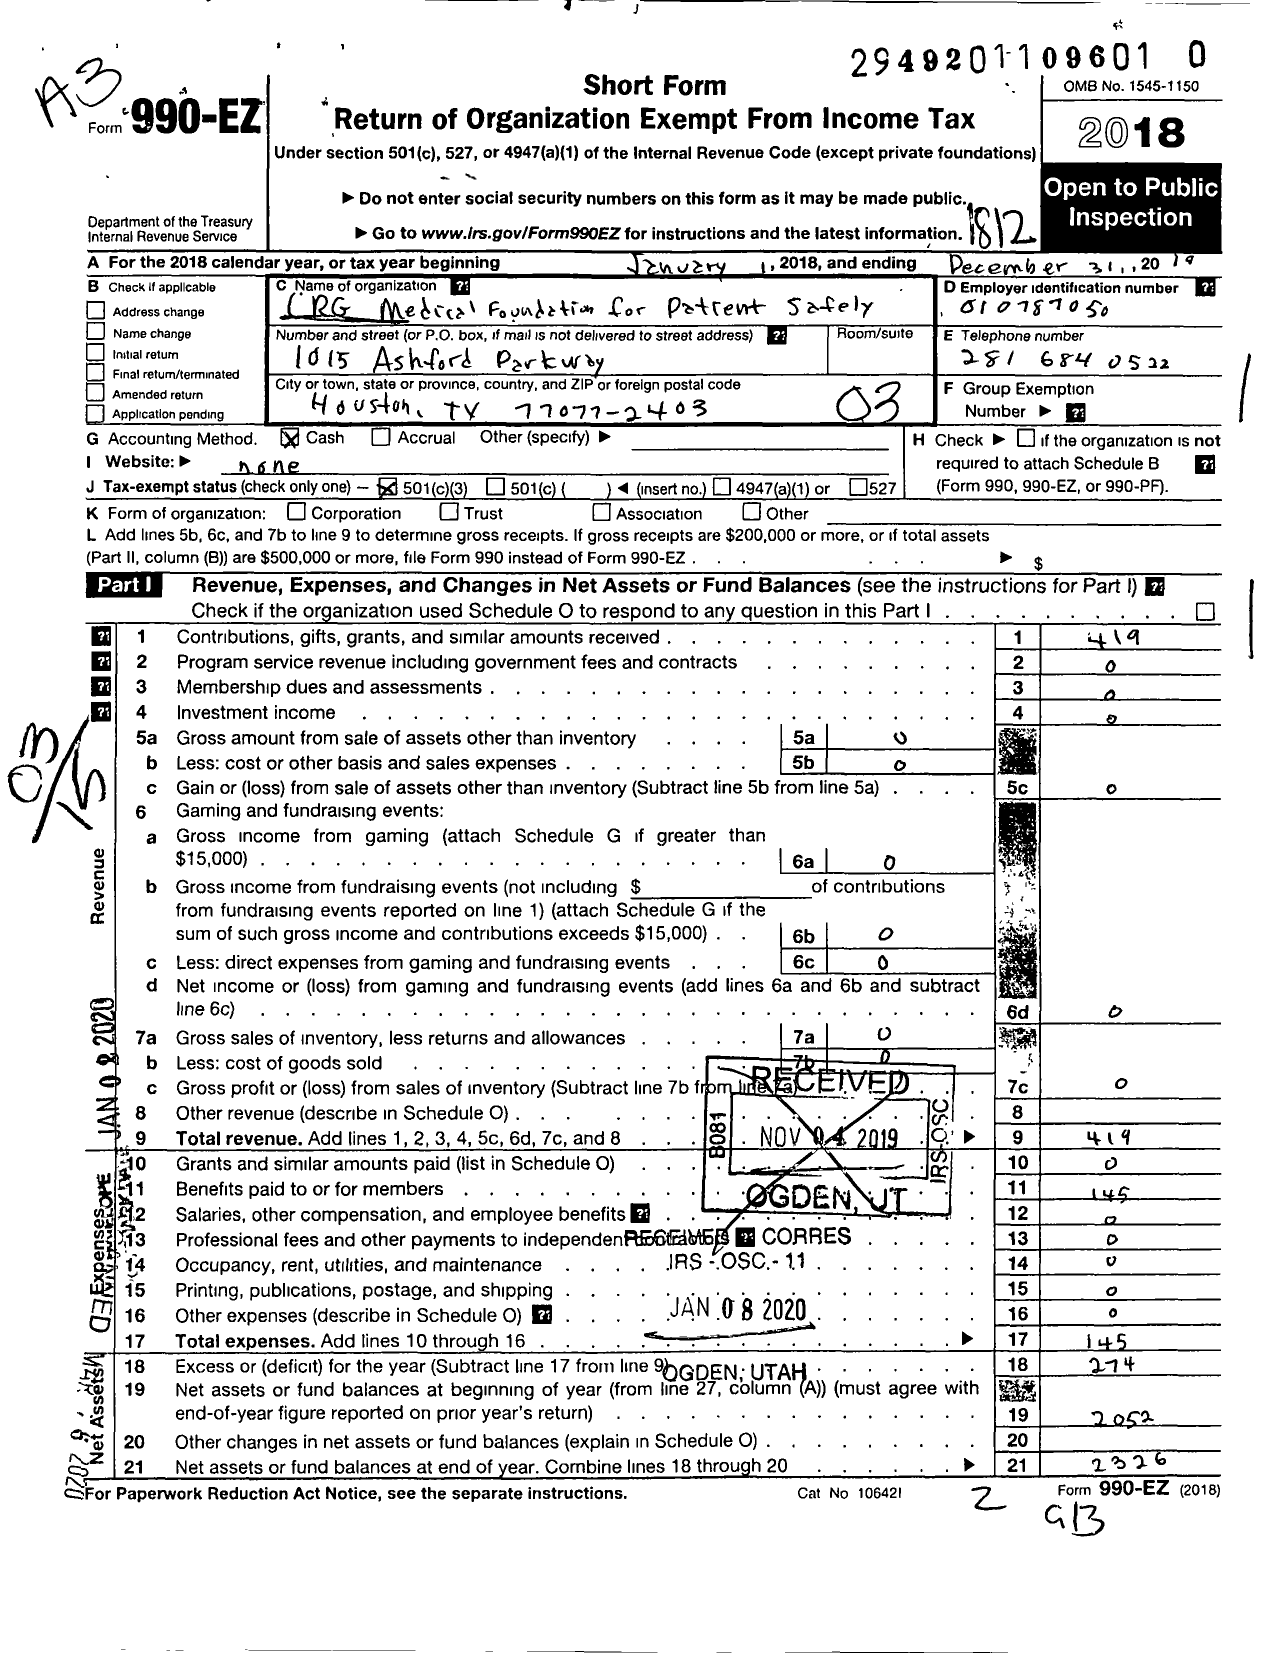 Image of first page of 2018 Form 990EZ for CRG Medical Foundation for Patient Safety